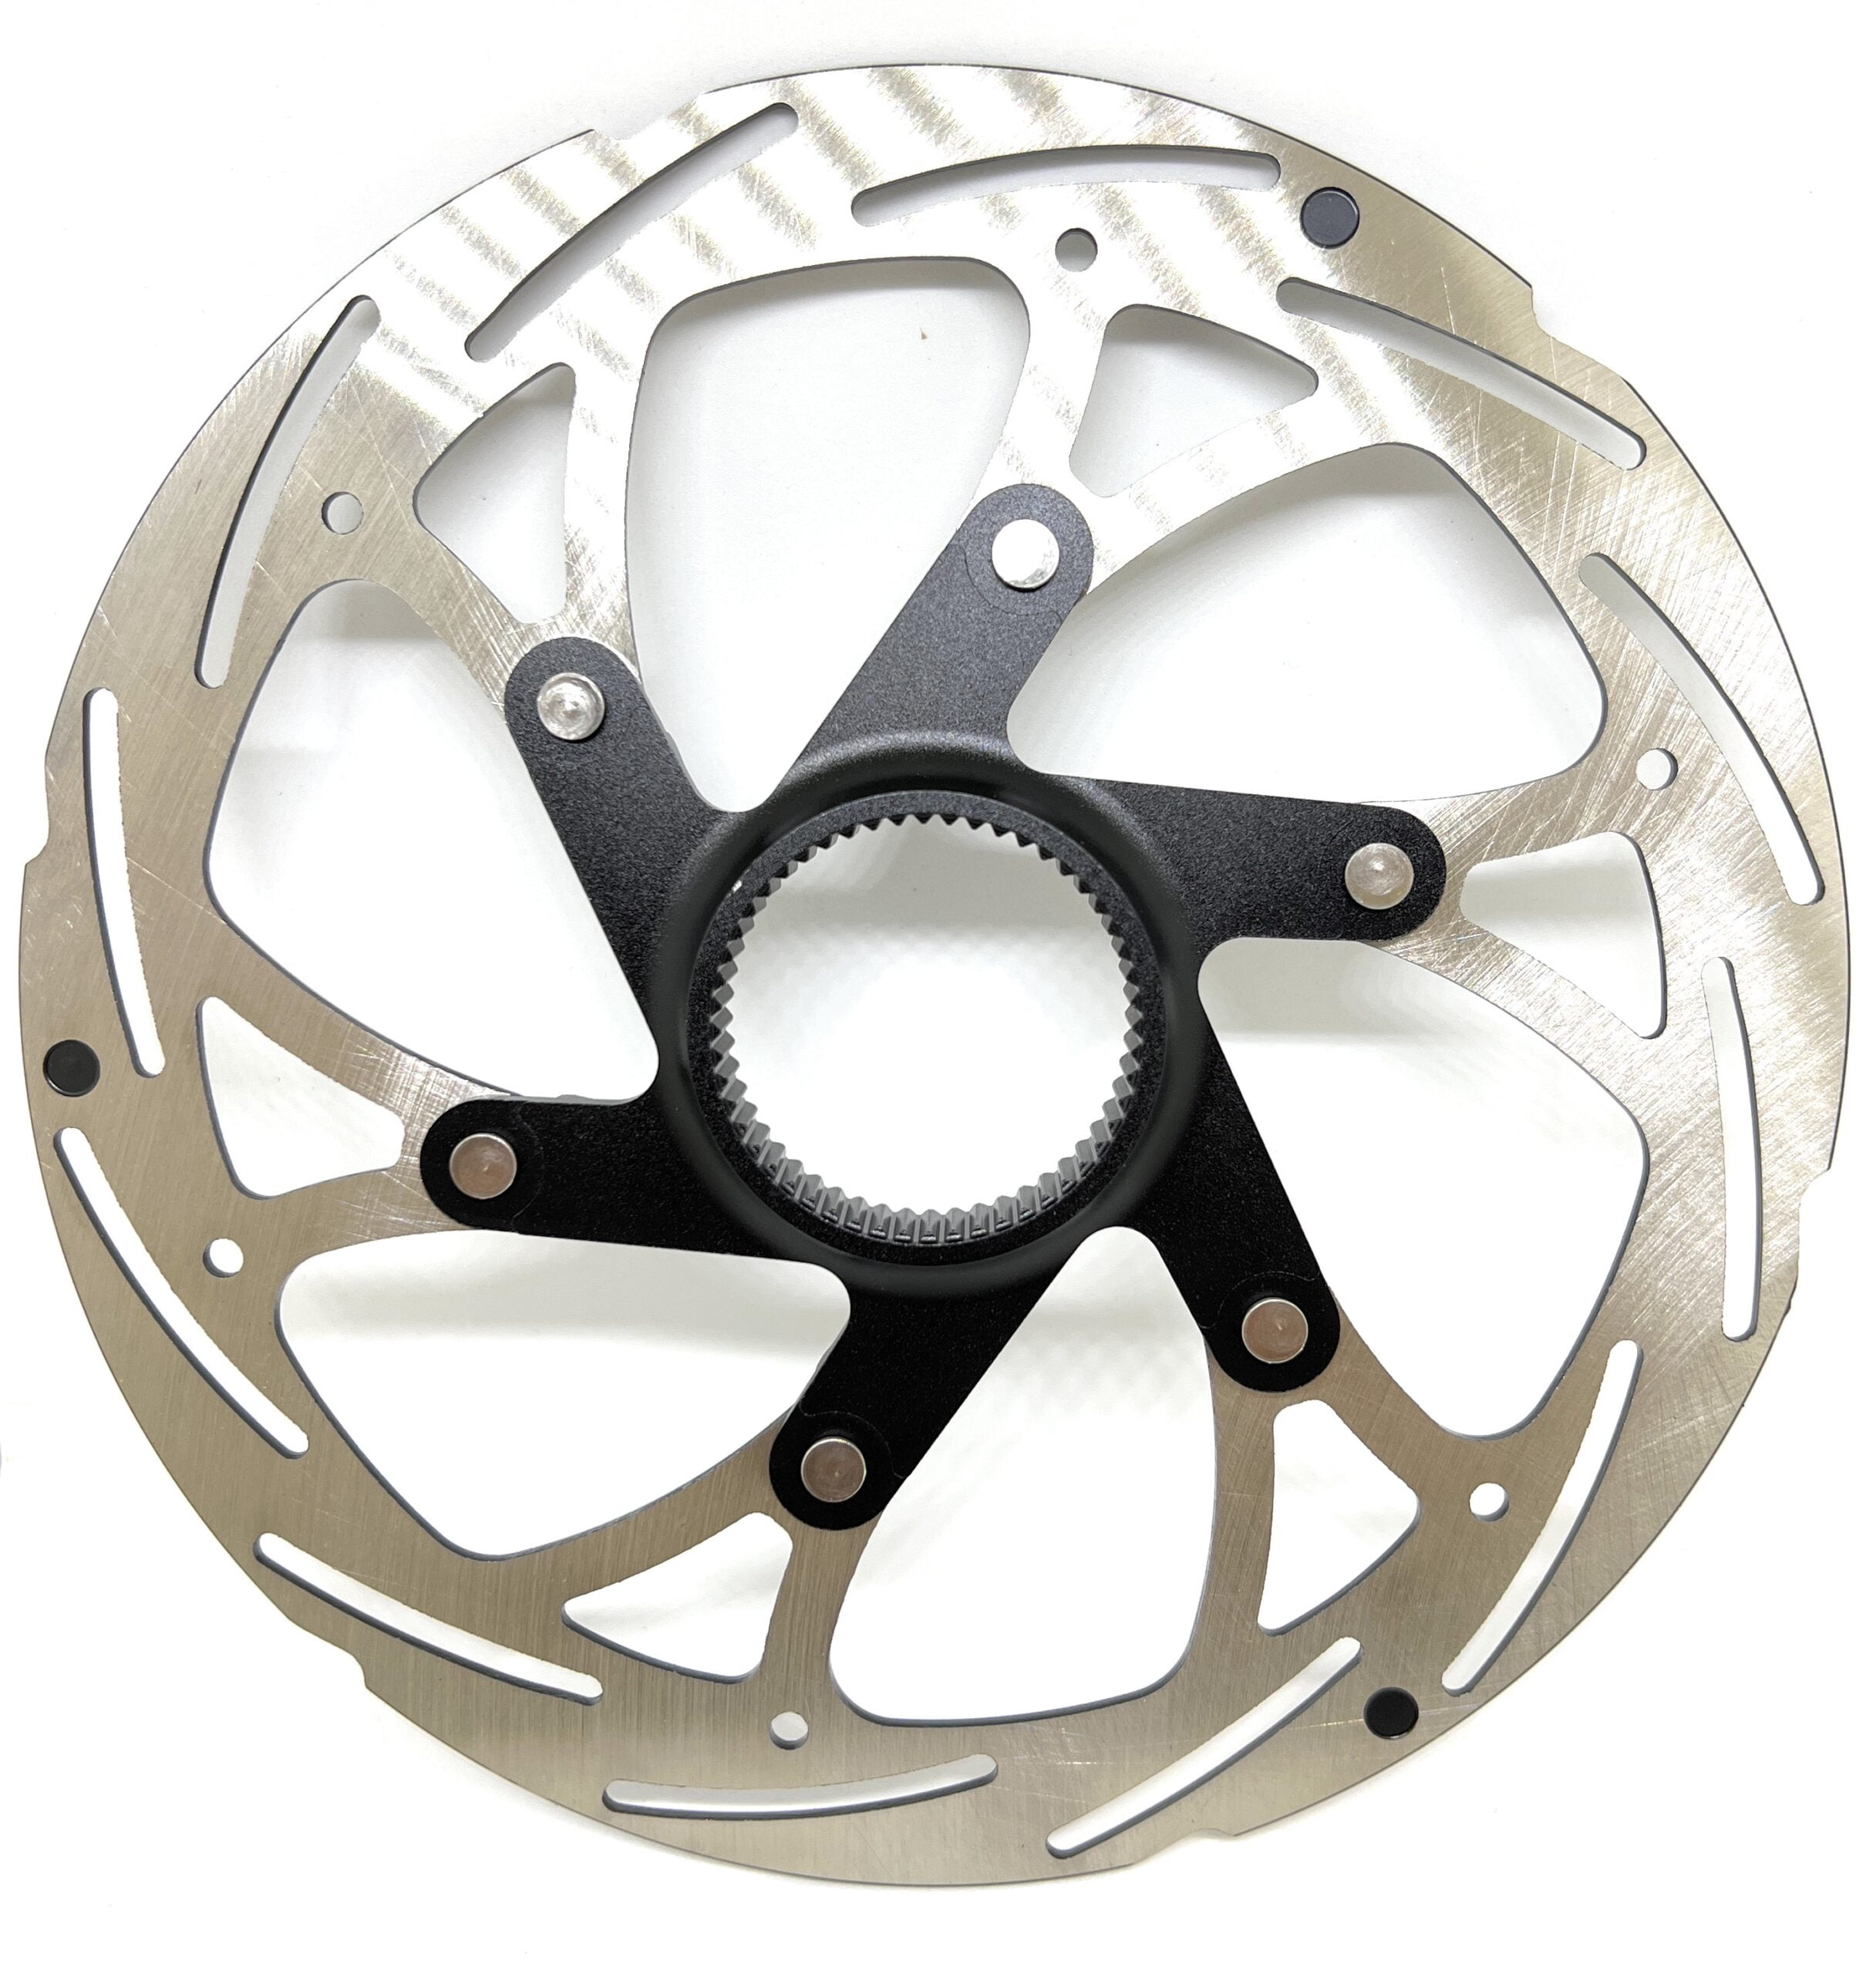 Indica Sur moneda Bike center lock rotor floating replacement 140mm rotor mountain bike &  road7075 Alloy. Compatible with center lock. 123g - Hardheaded Ram -  Bicycle brakes & Accessories